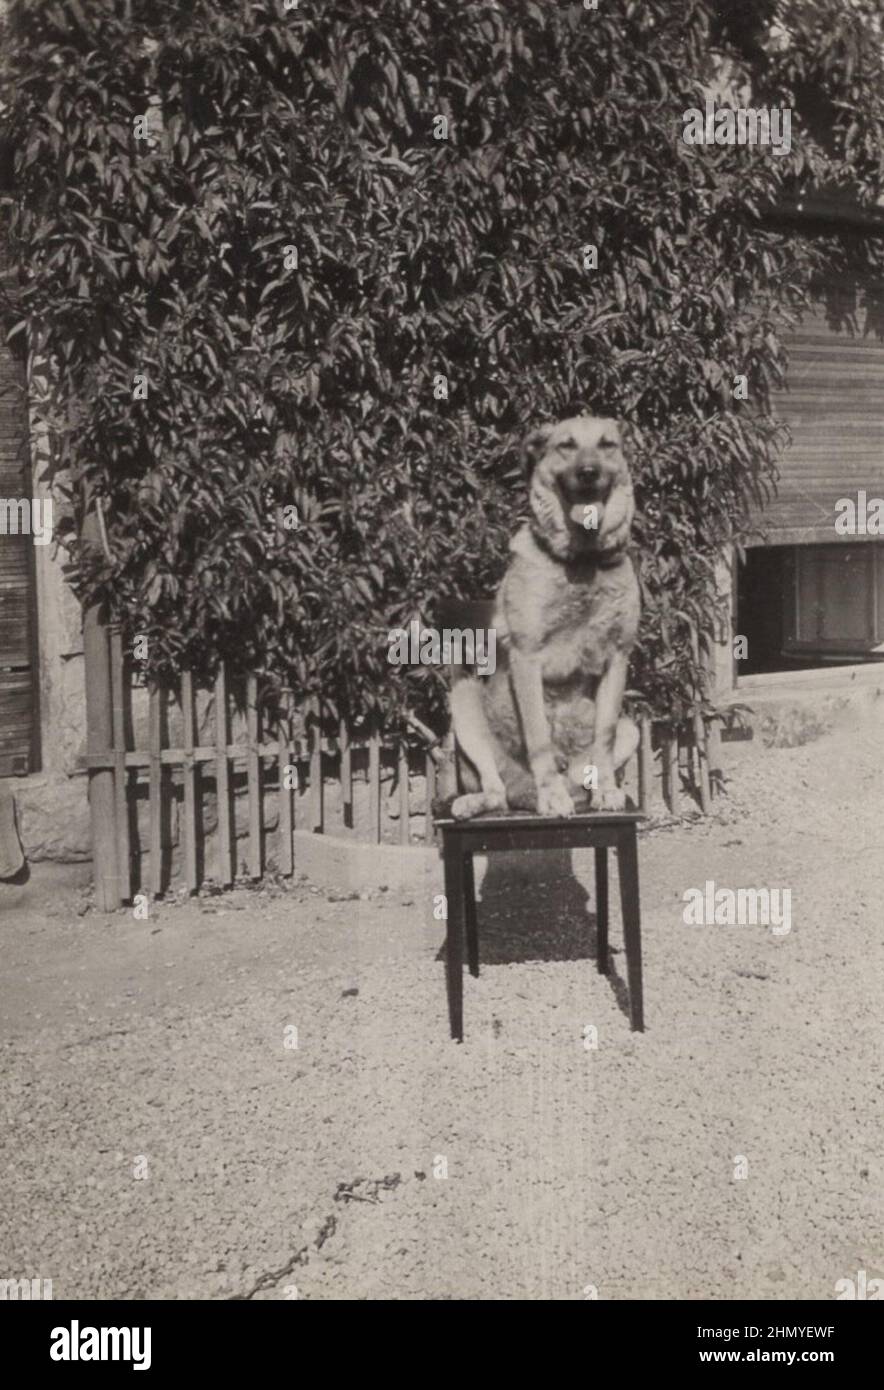 ADDITIONAL-RIGHTS-CLEARANCE-INFO-NOT-AVAILABLE happy german sheperd puppy/ dog  is sitting on the chair and pay attention for his owner who possibly holding the camera and taking the photo. Period: 1930s Stock Photo